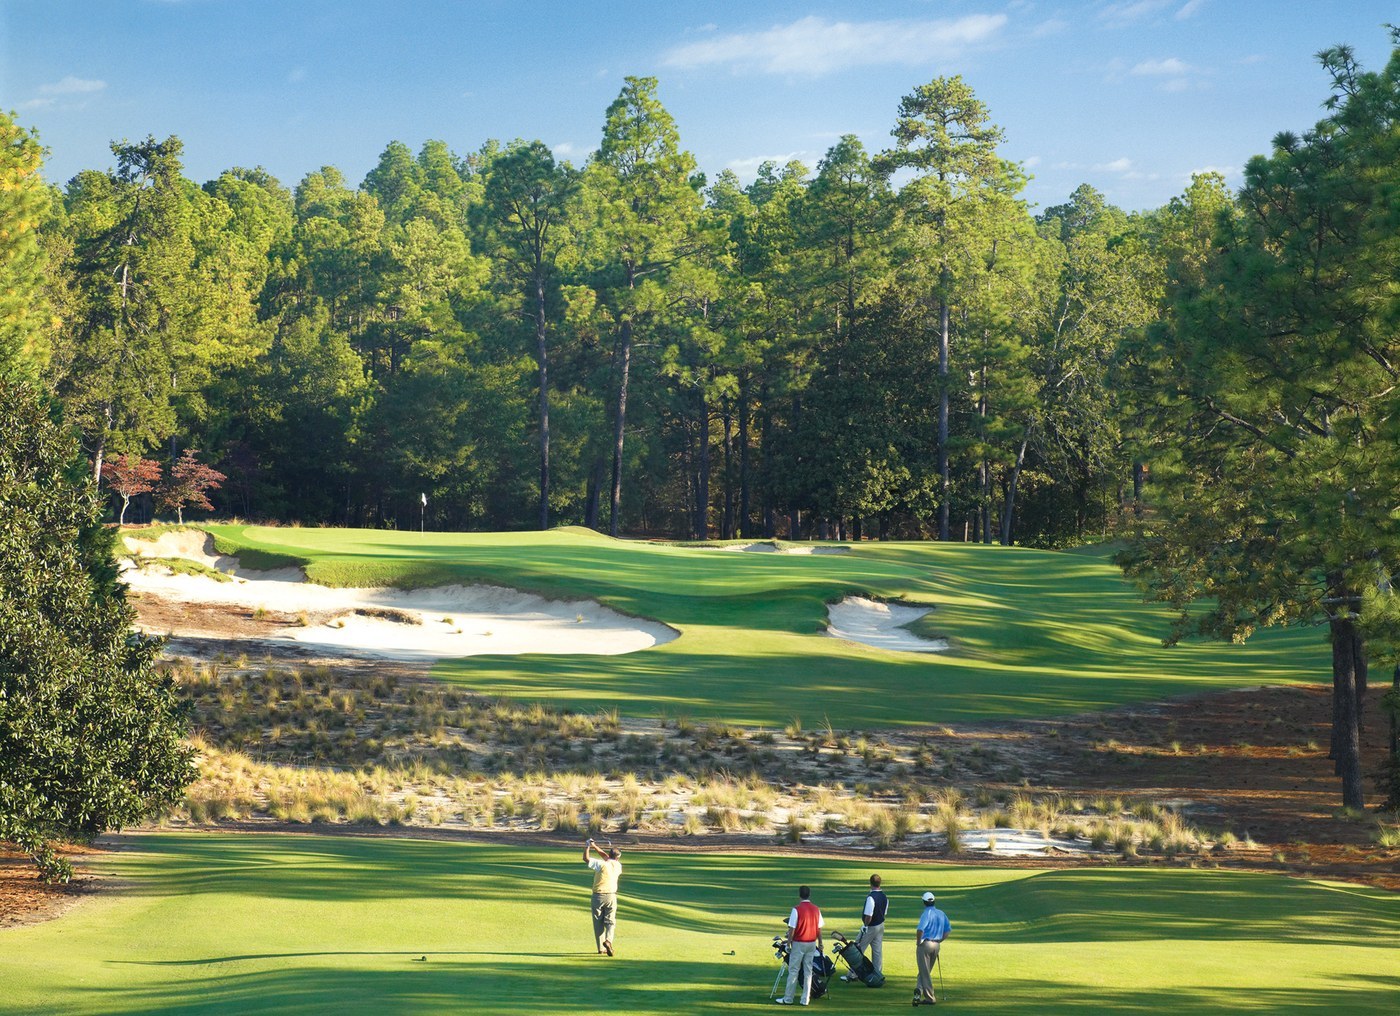 Golf Vacation Package - Pinehurst Resort - 3 Nights, 3 Rounds, and Daily Breakfast!